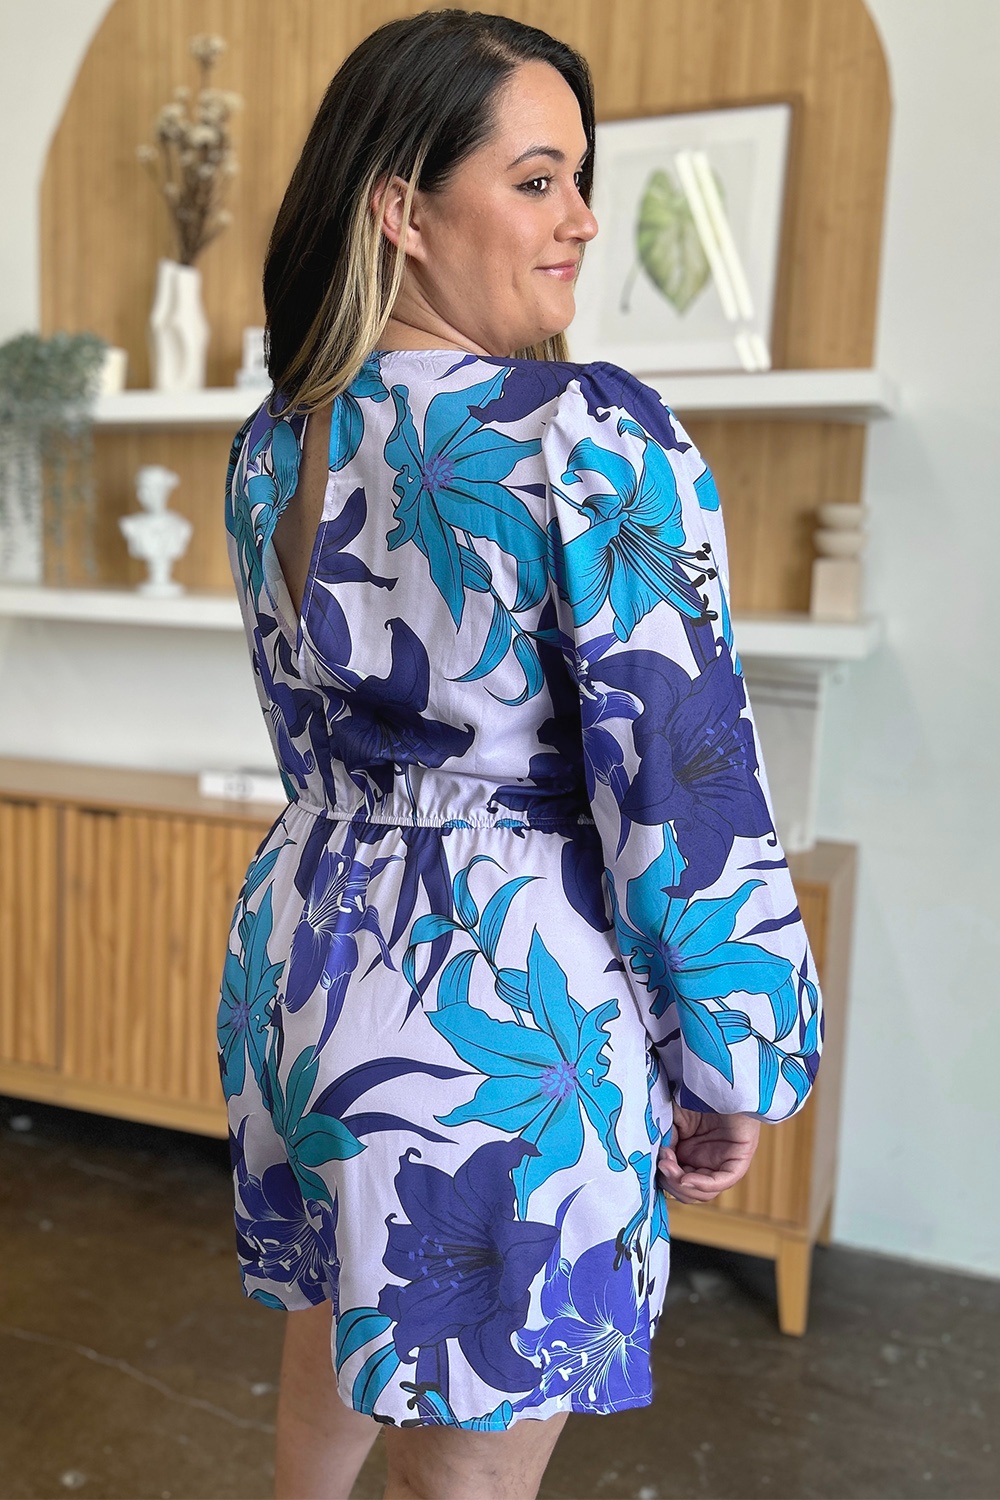 Chic floral romper with pockets, perfect for all-day style and comfort. Versatile, breathable, easy-care. Available in green and blue.